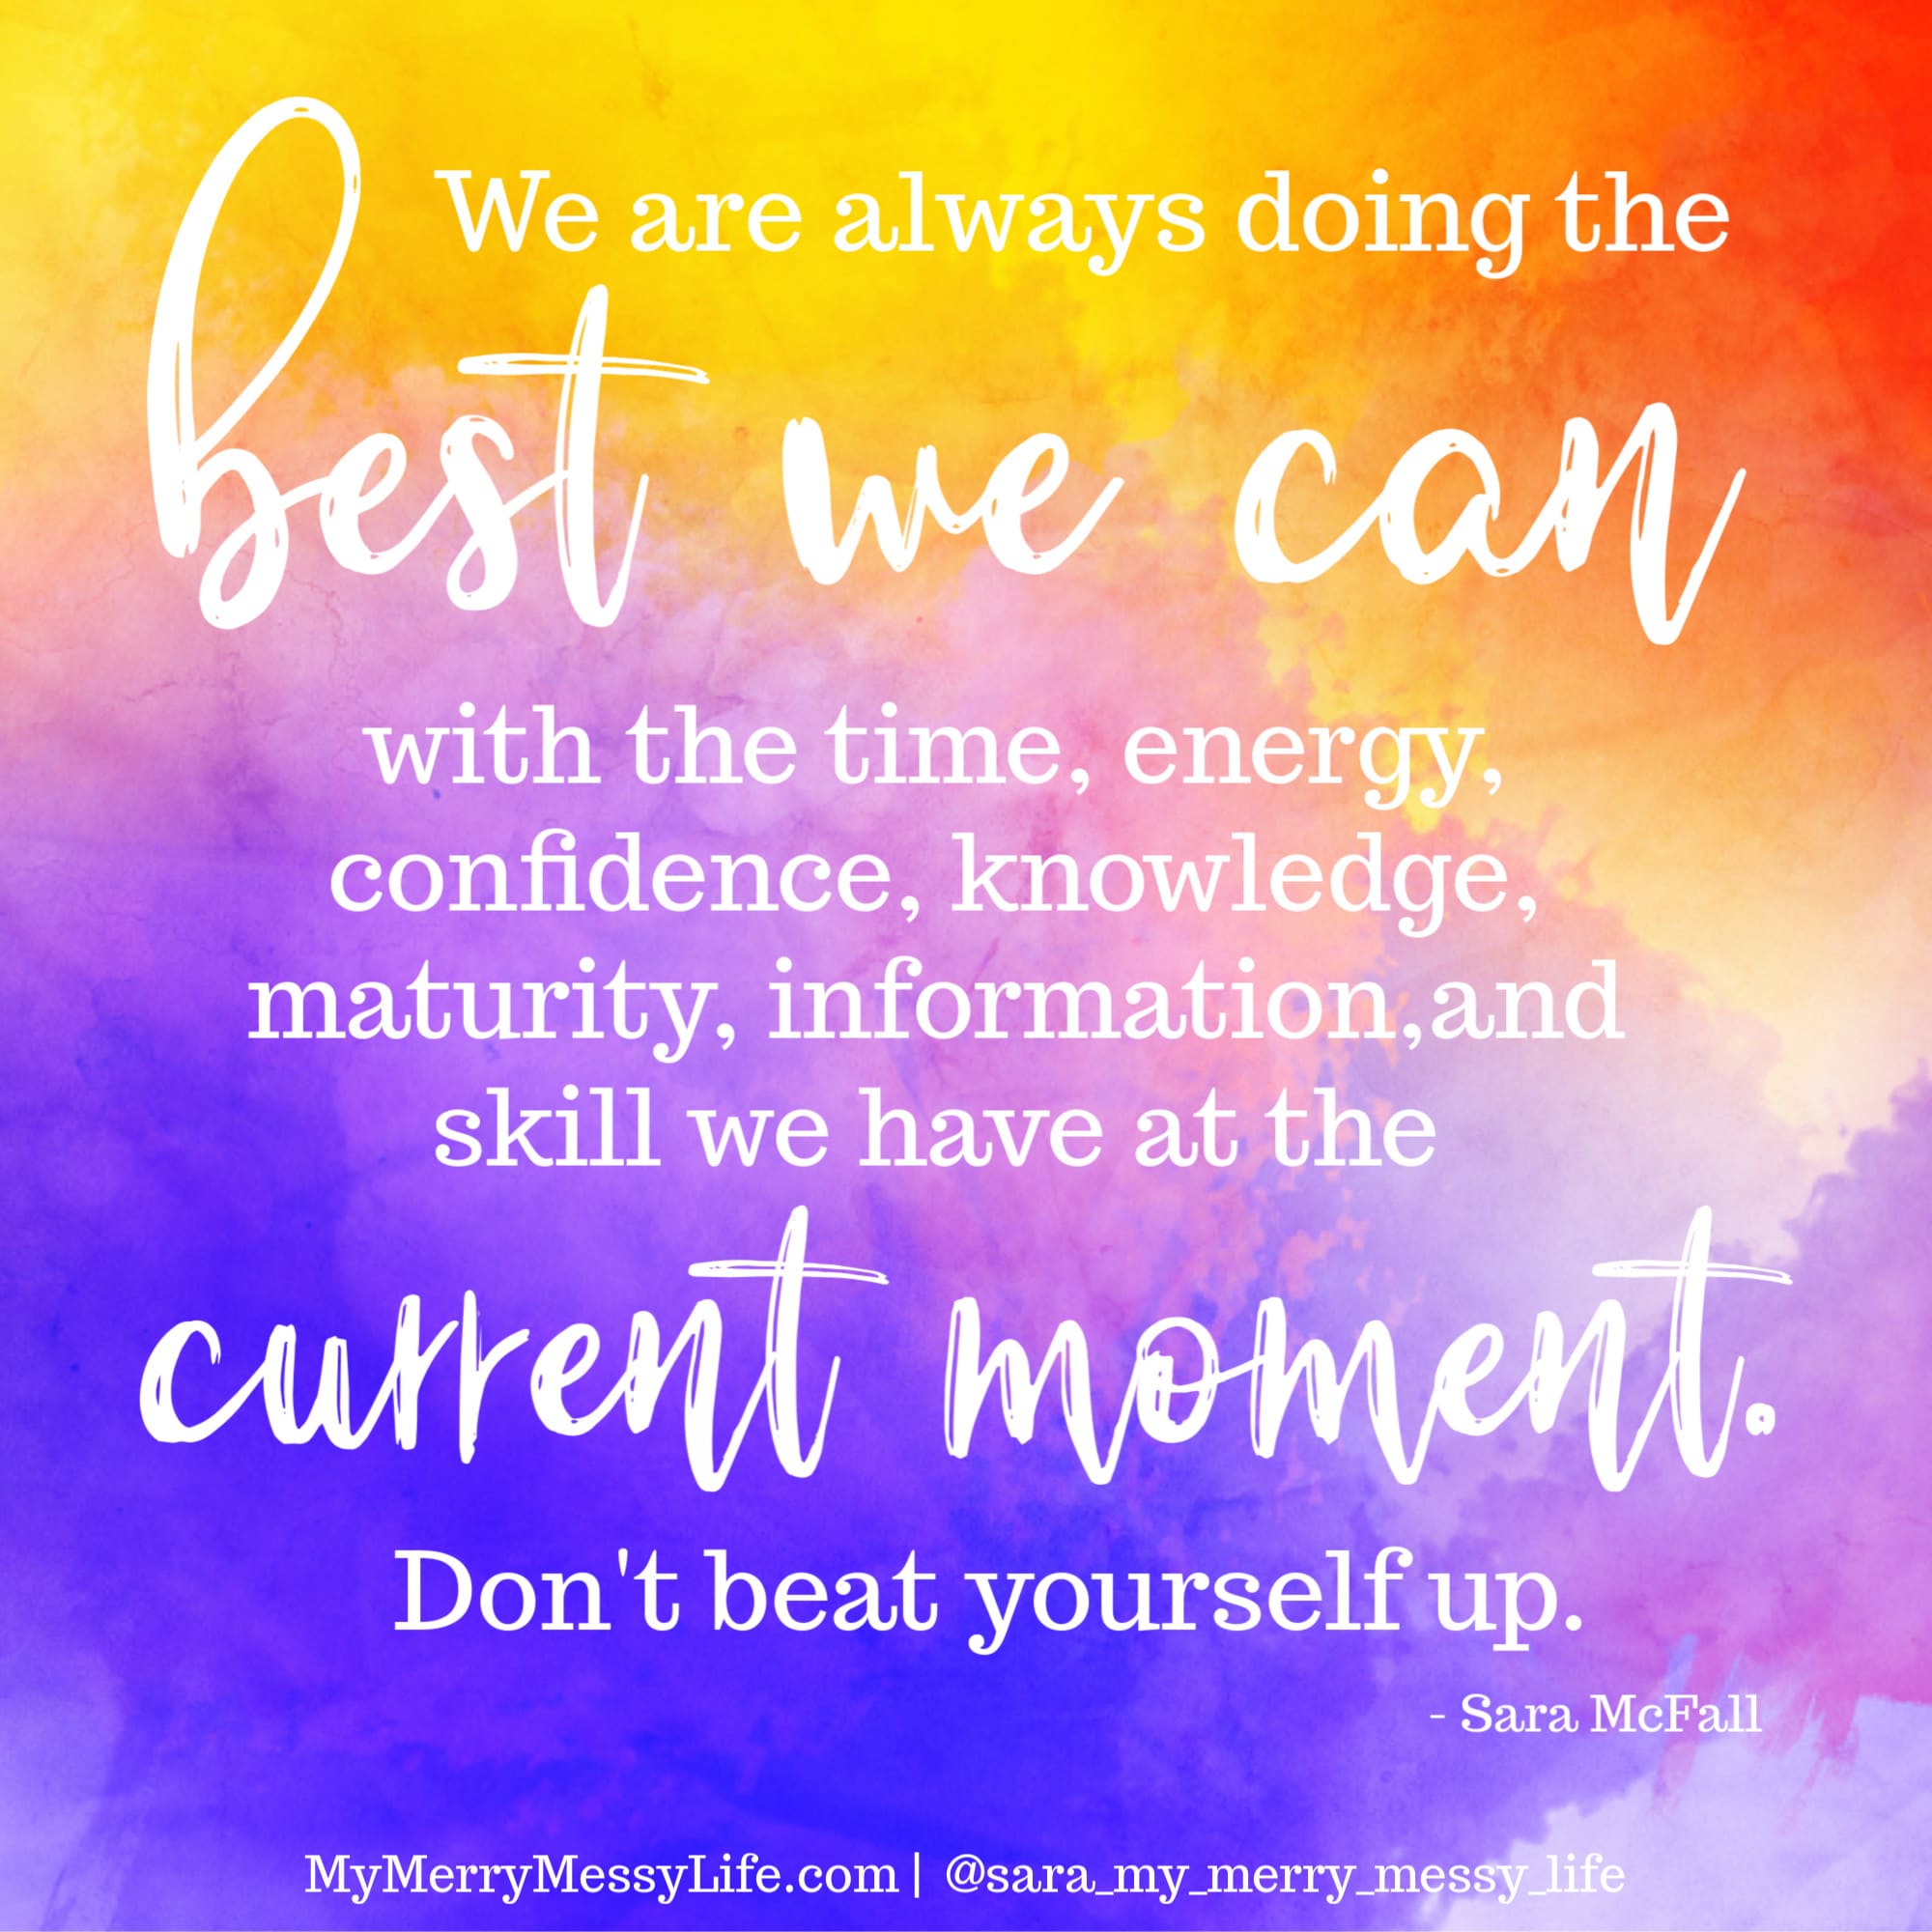 We are always doing the best we can with the time, energy, confidence, knowledge, maturity, information and skill we have at the current moment. Don't beat yourself up.  - Sara McFall of MyMerryMessyLife.com and The Merry Messy Moms Show Podcast